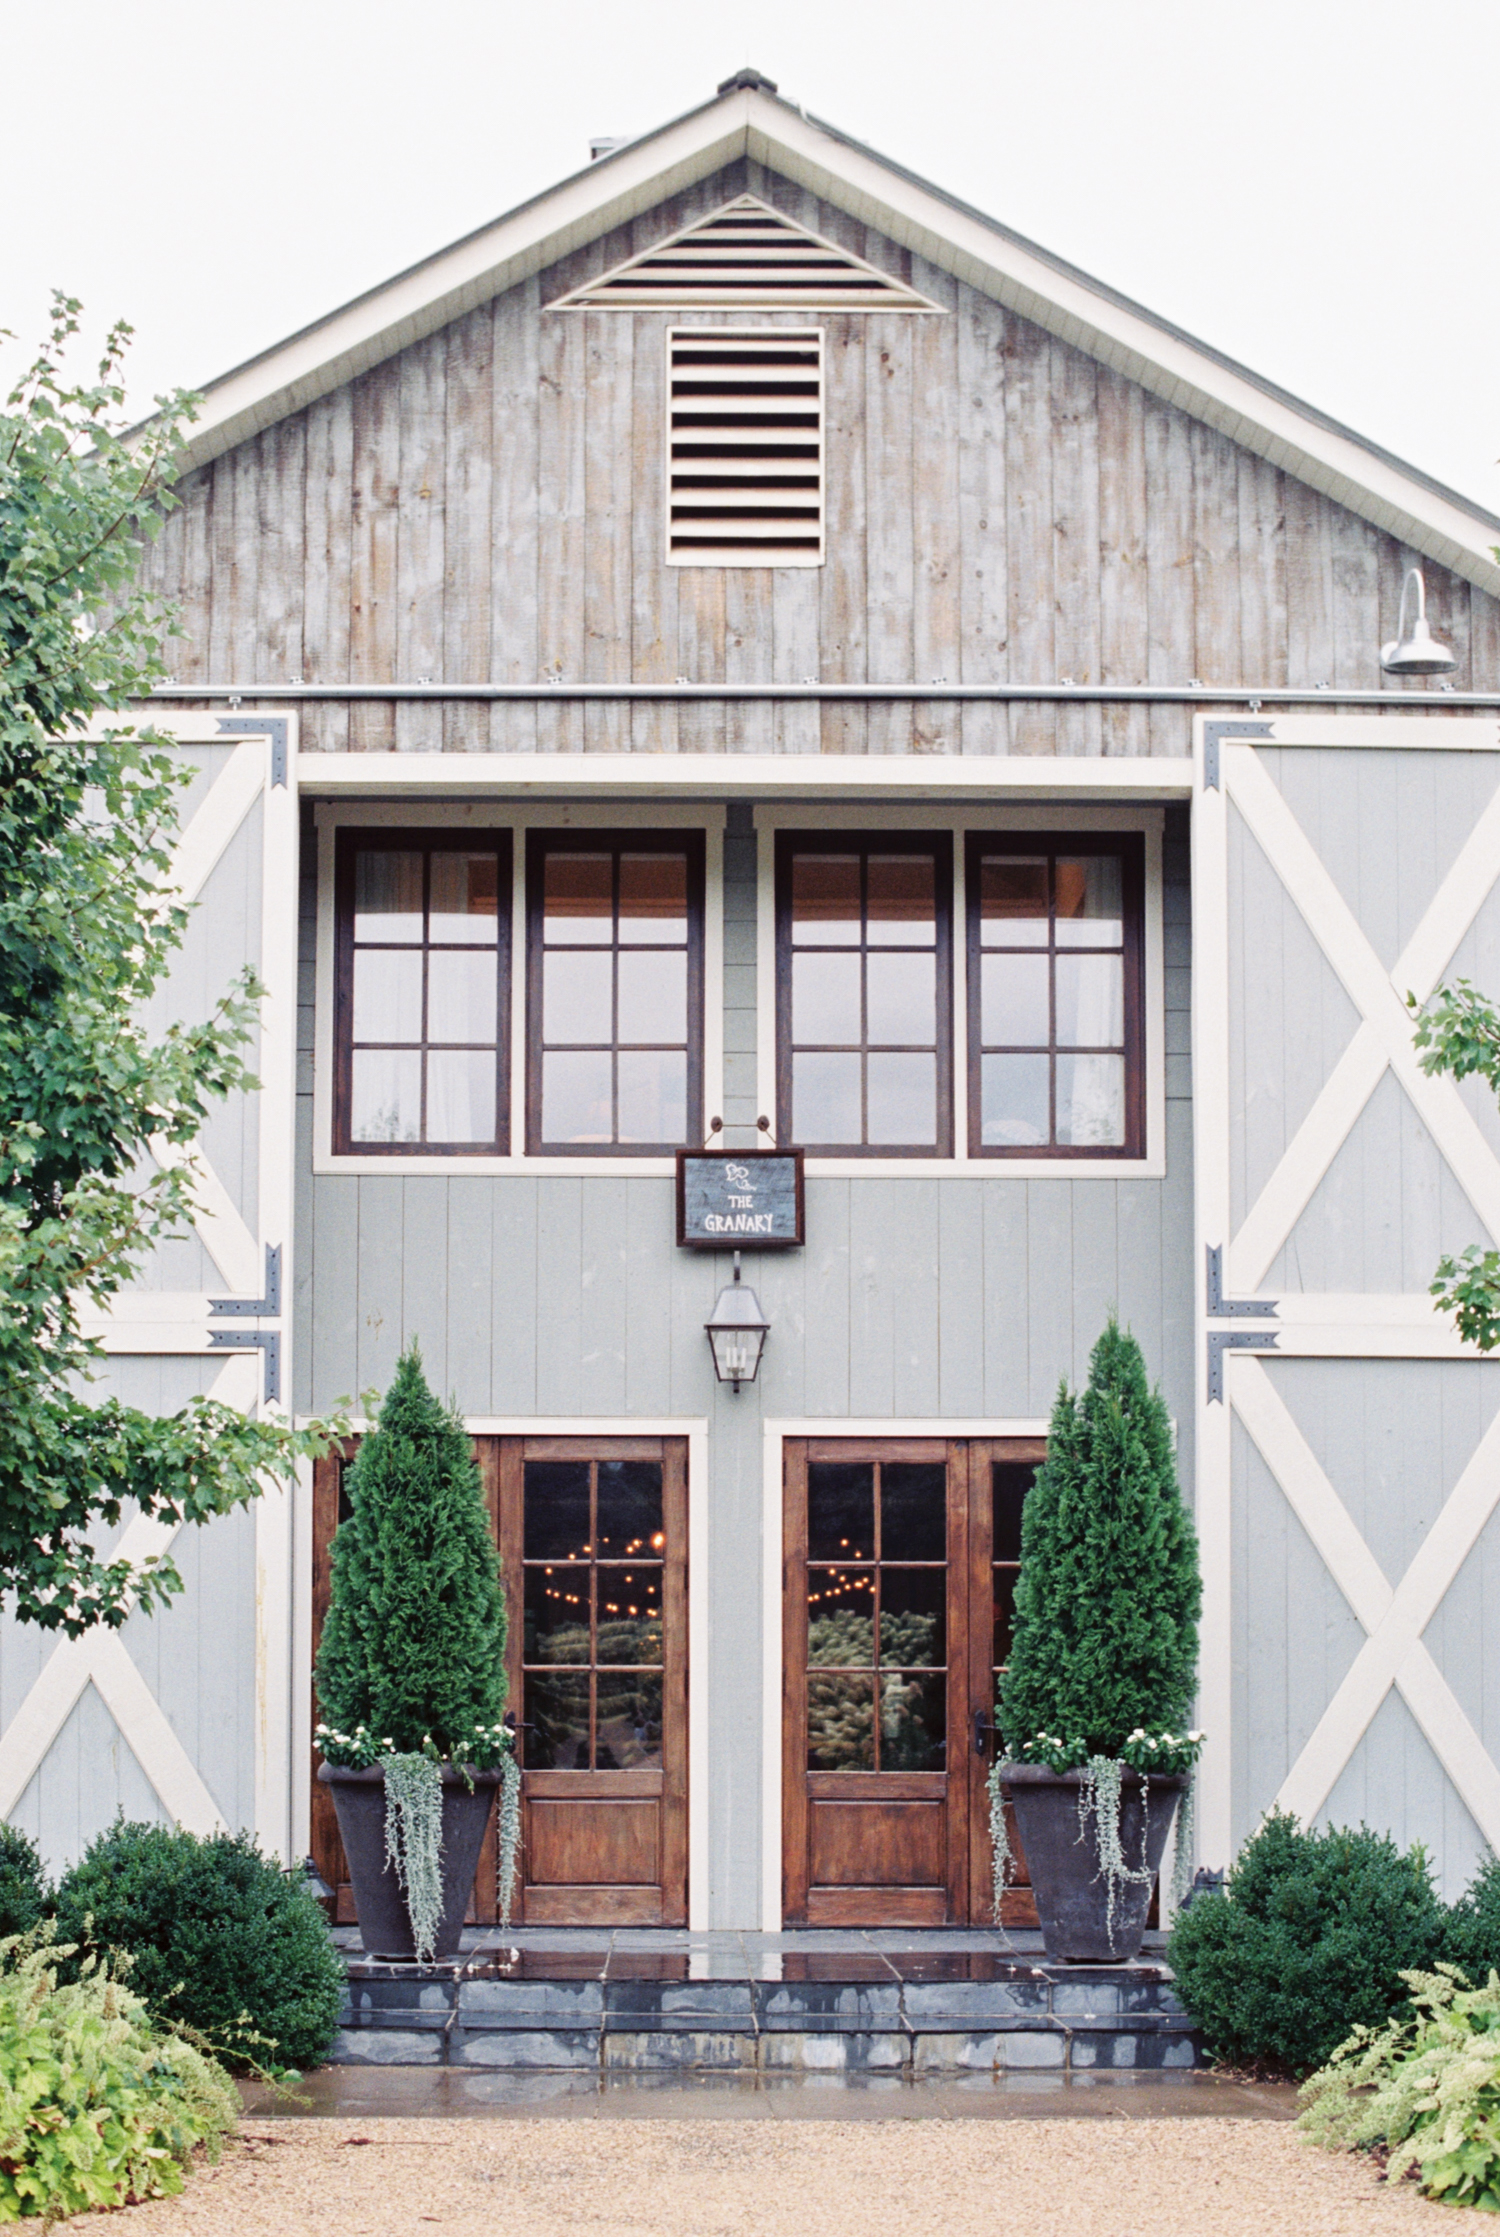 Pippin Hill Wedding Photos | Molly Carr Photography | Lauren Emerson Events | Pippin Hill Farm & Vineyard | Misty Morning at Pippin Hill in Charlottesville, Virginia | Grey Barn